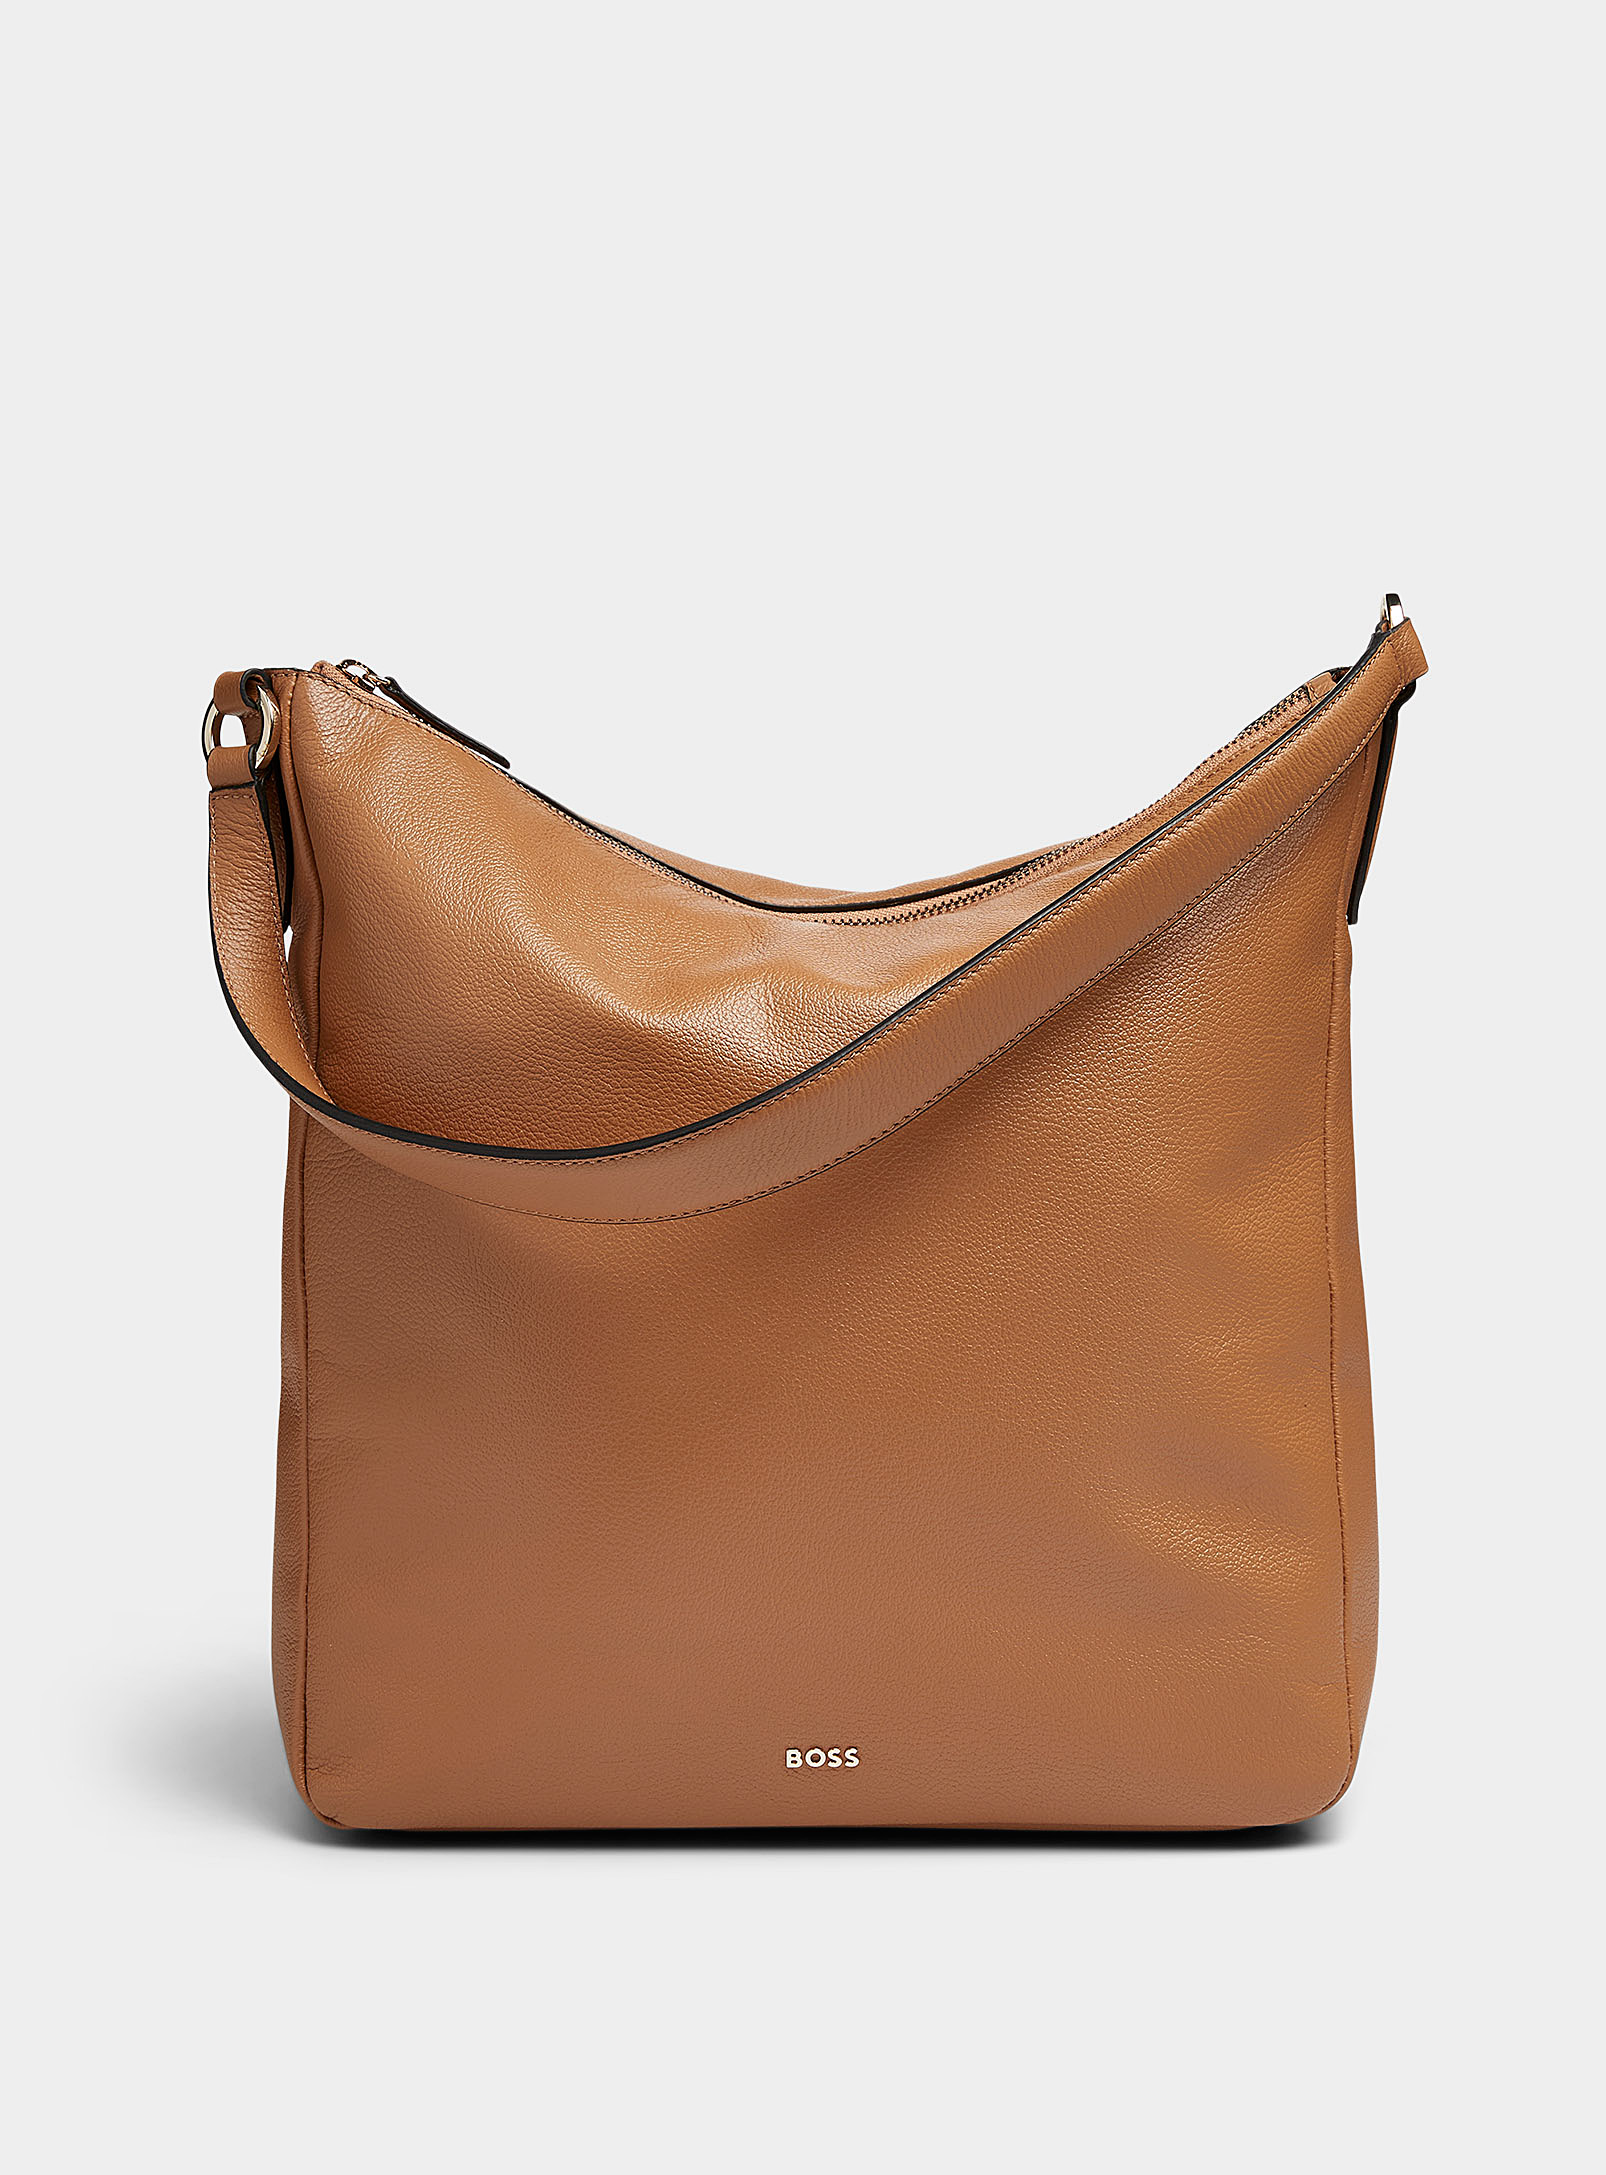 Hugo Boss Alyce Pebbled Leather Square Saddle Bag In Brown